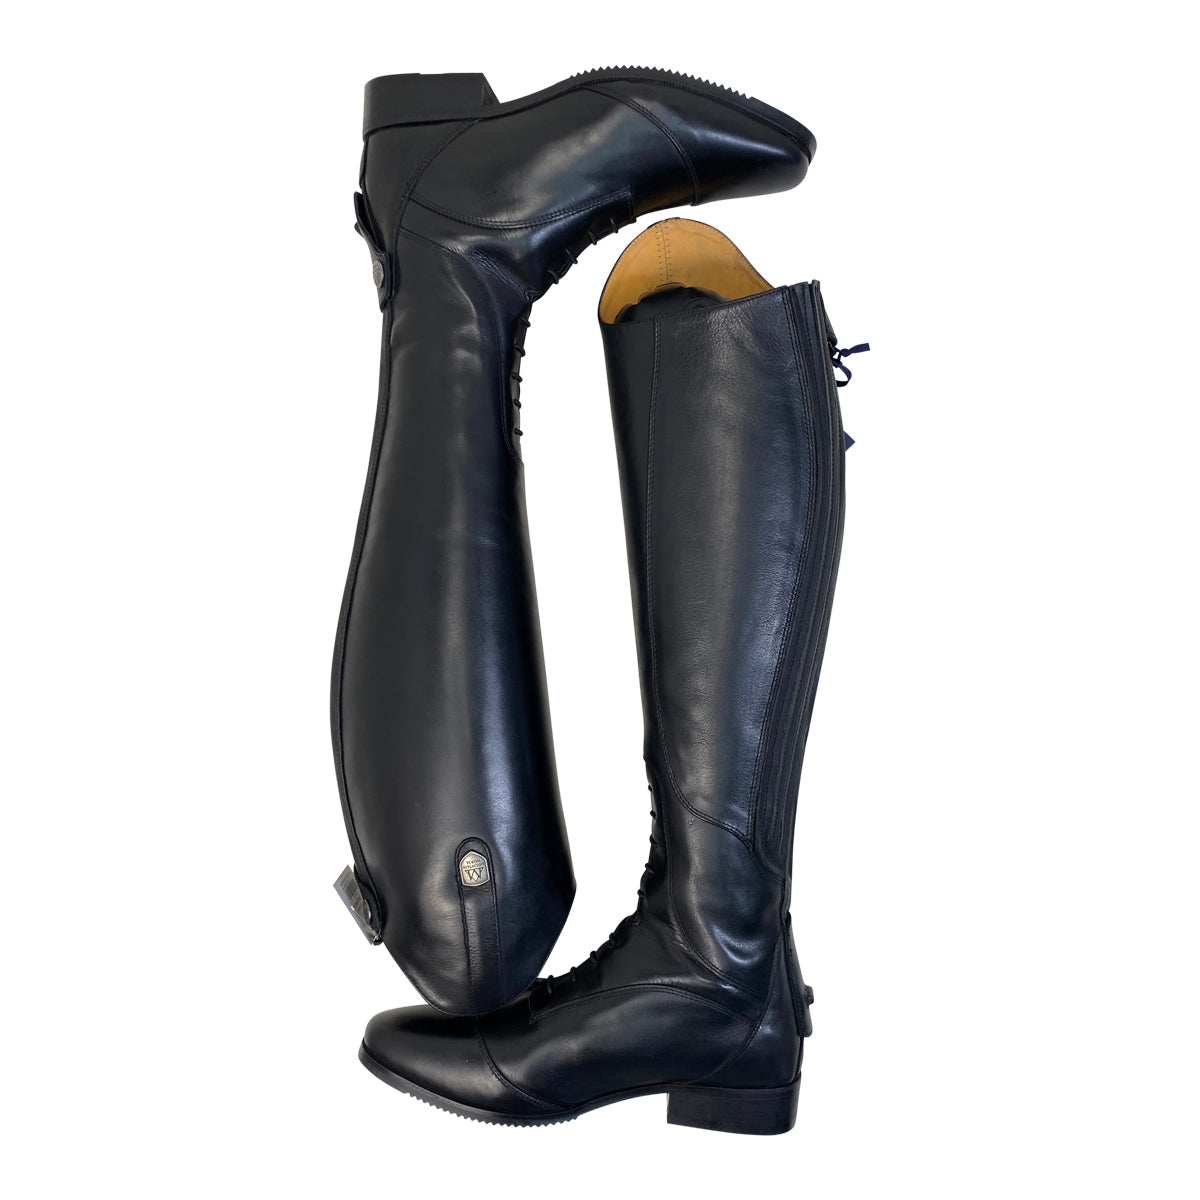 Mountain Horse 'Superior" Field Boots in Black